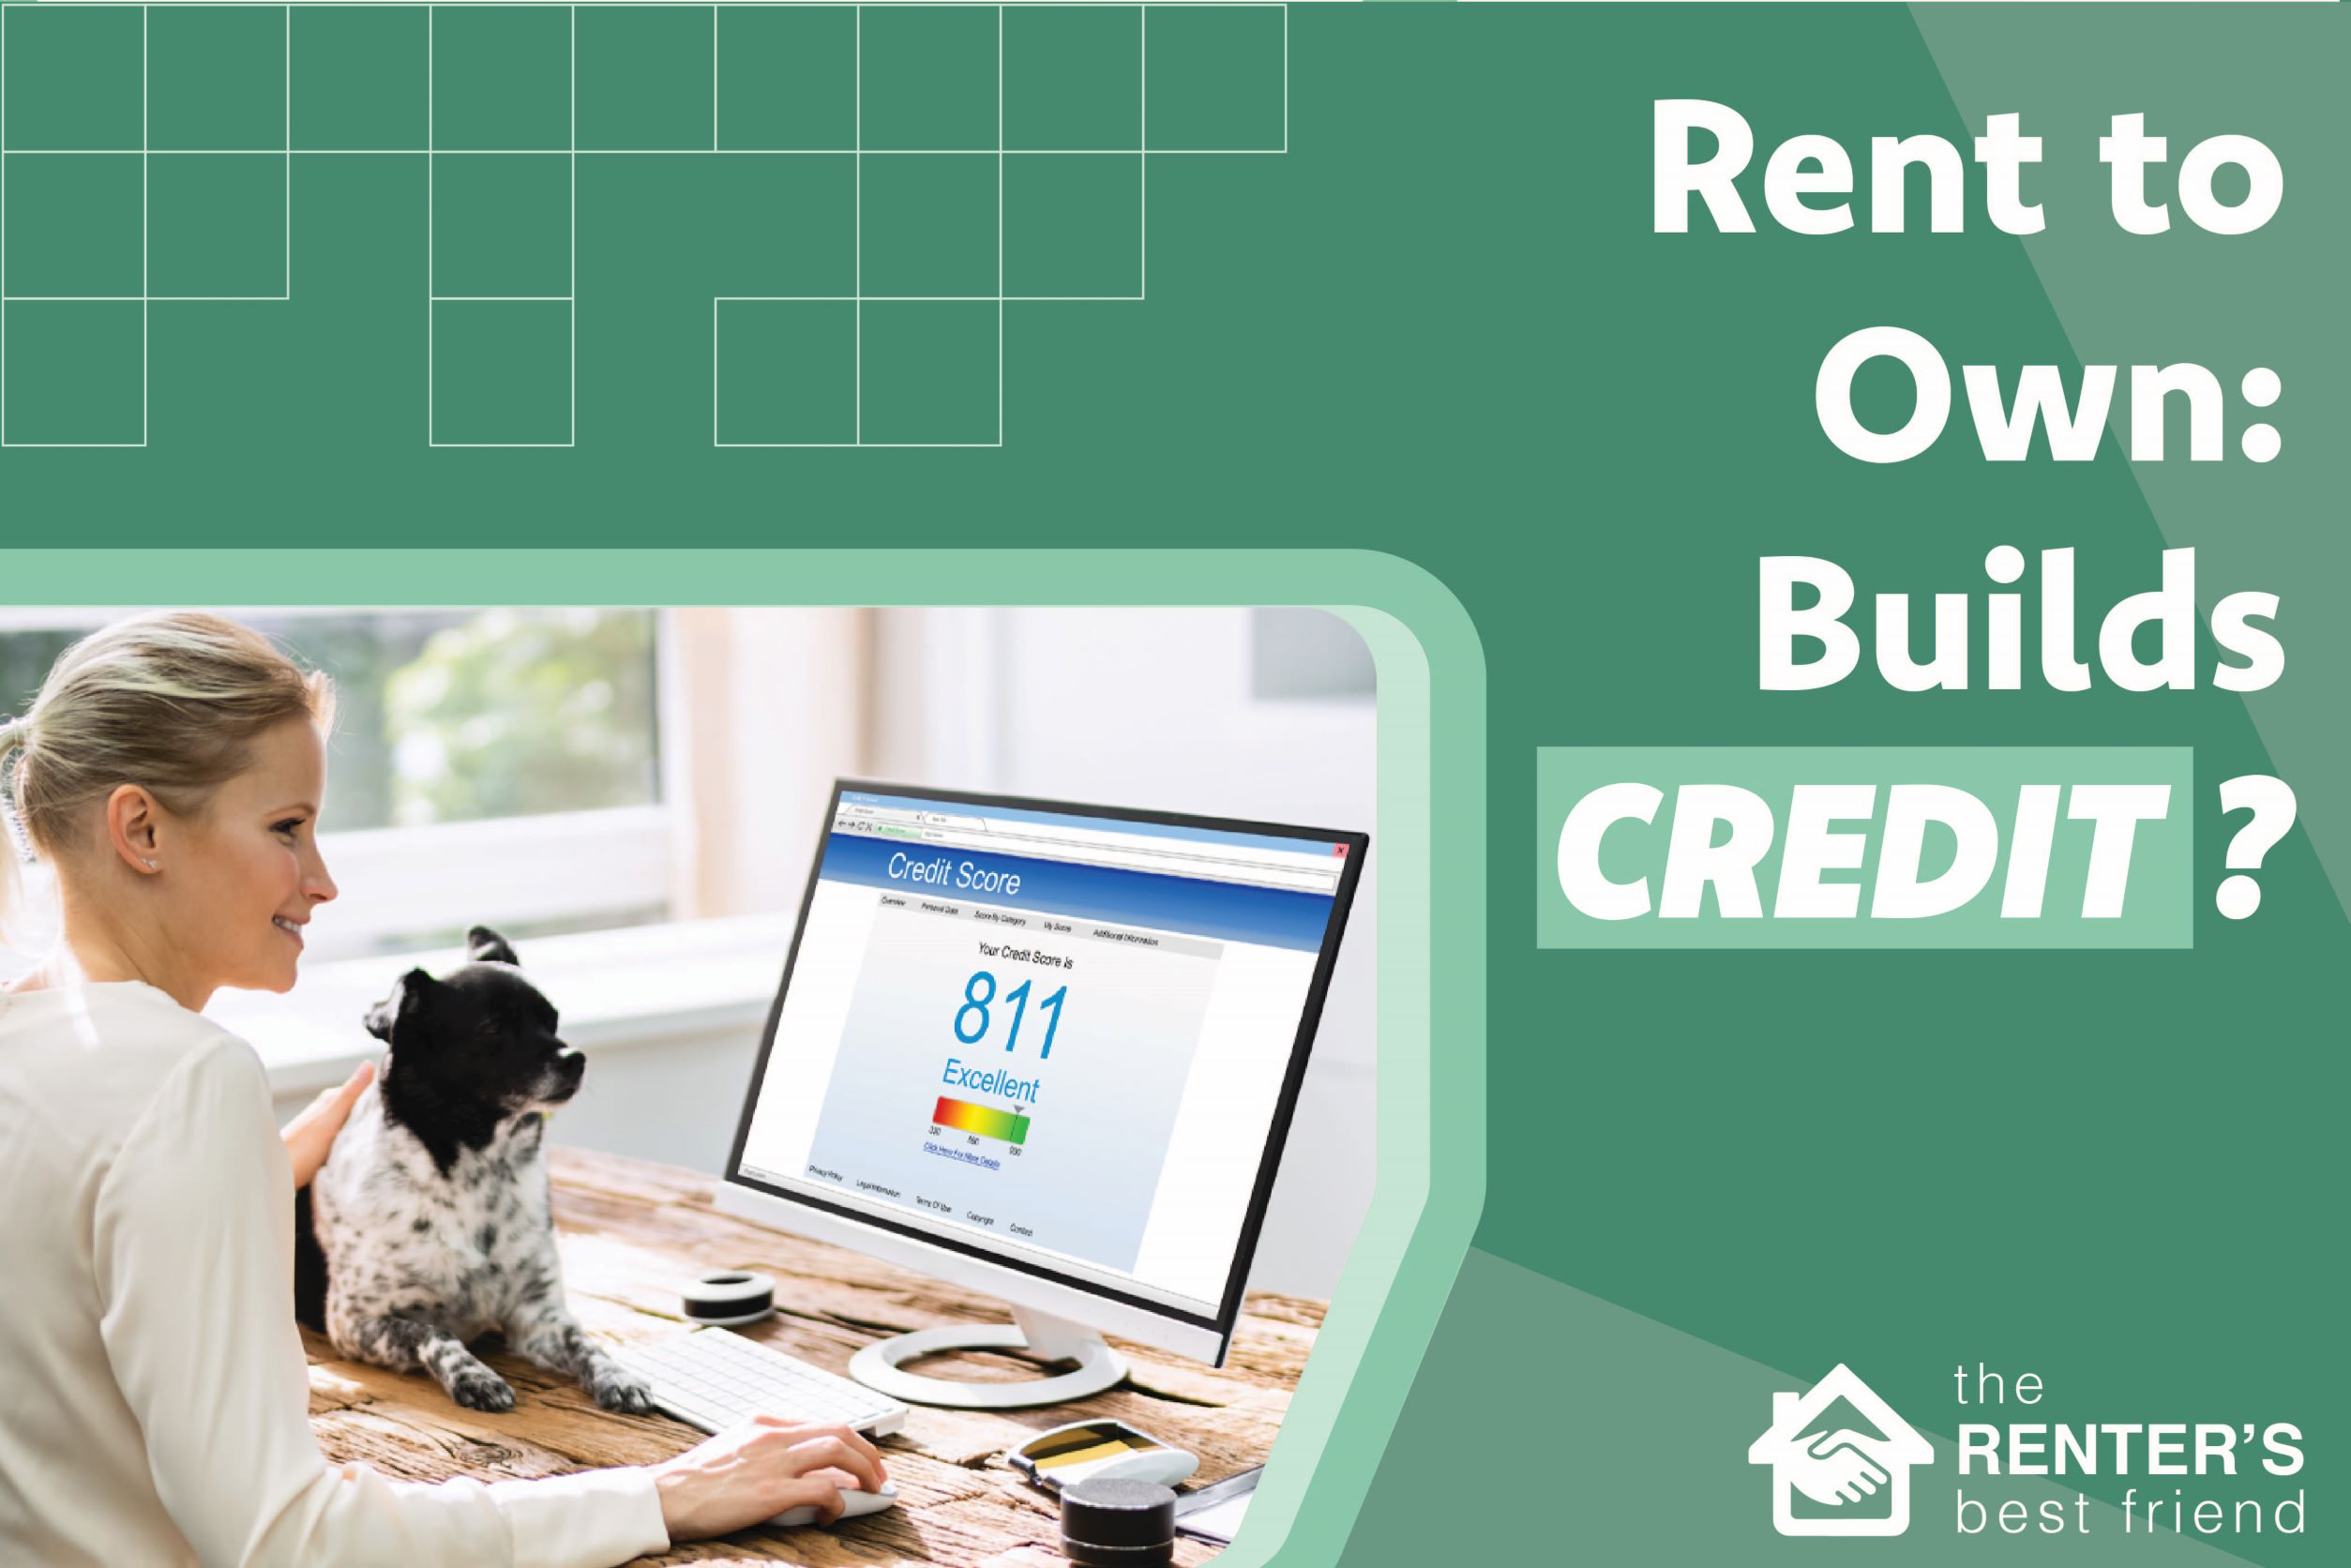 Do rent to own payments help build your credit?